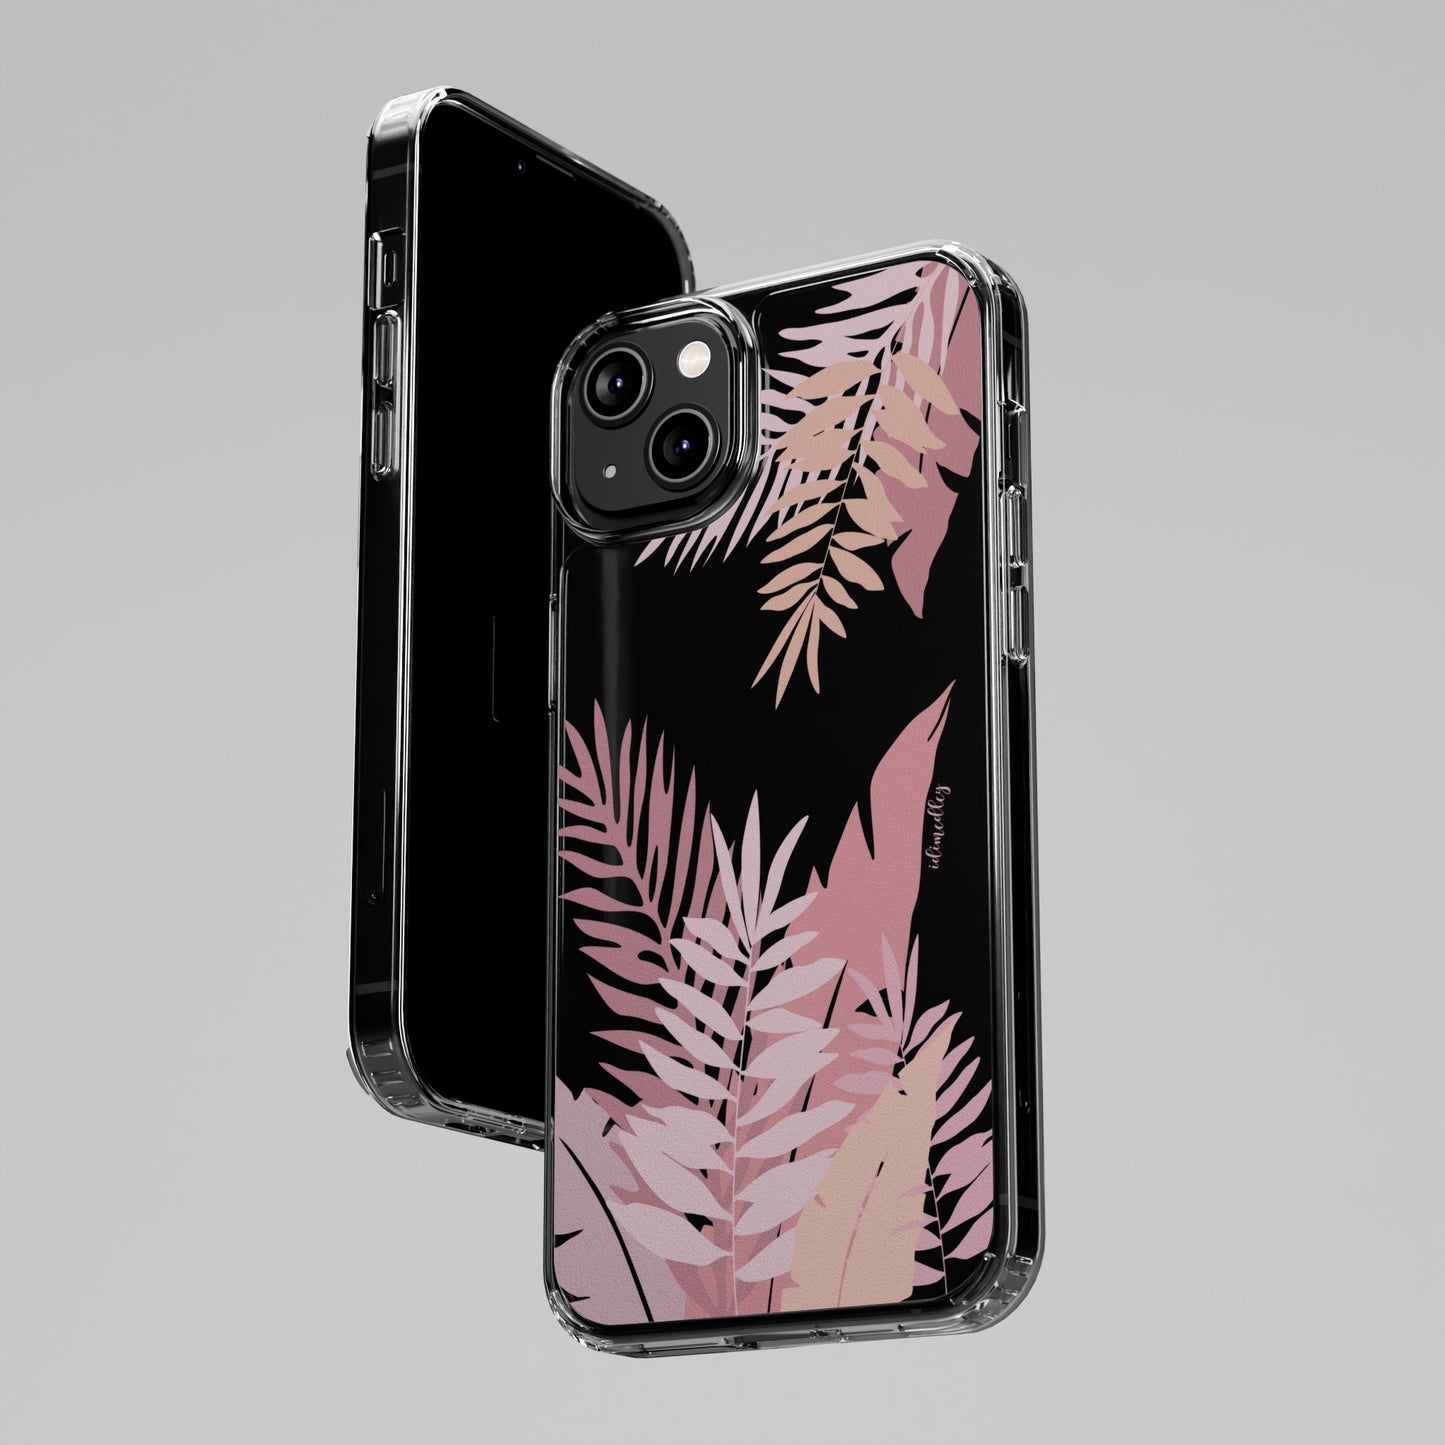 Whispering Leaves (Pink) CLEAR Case